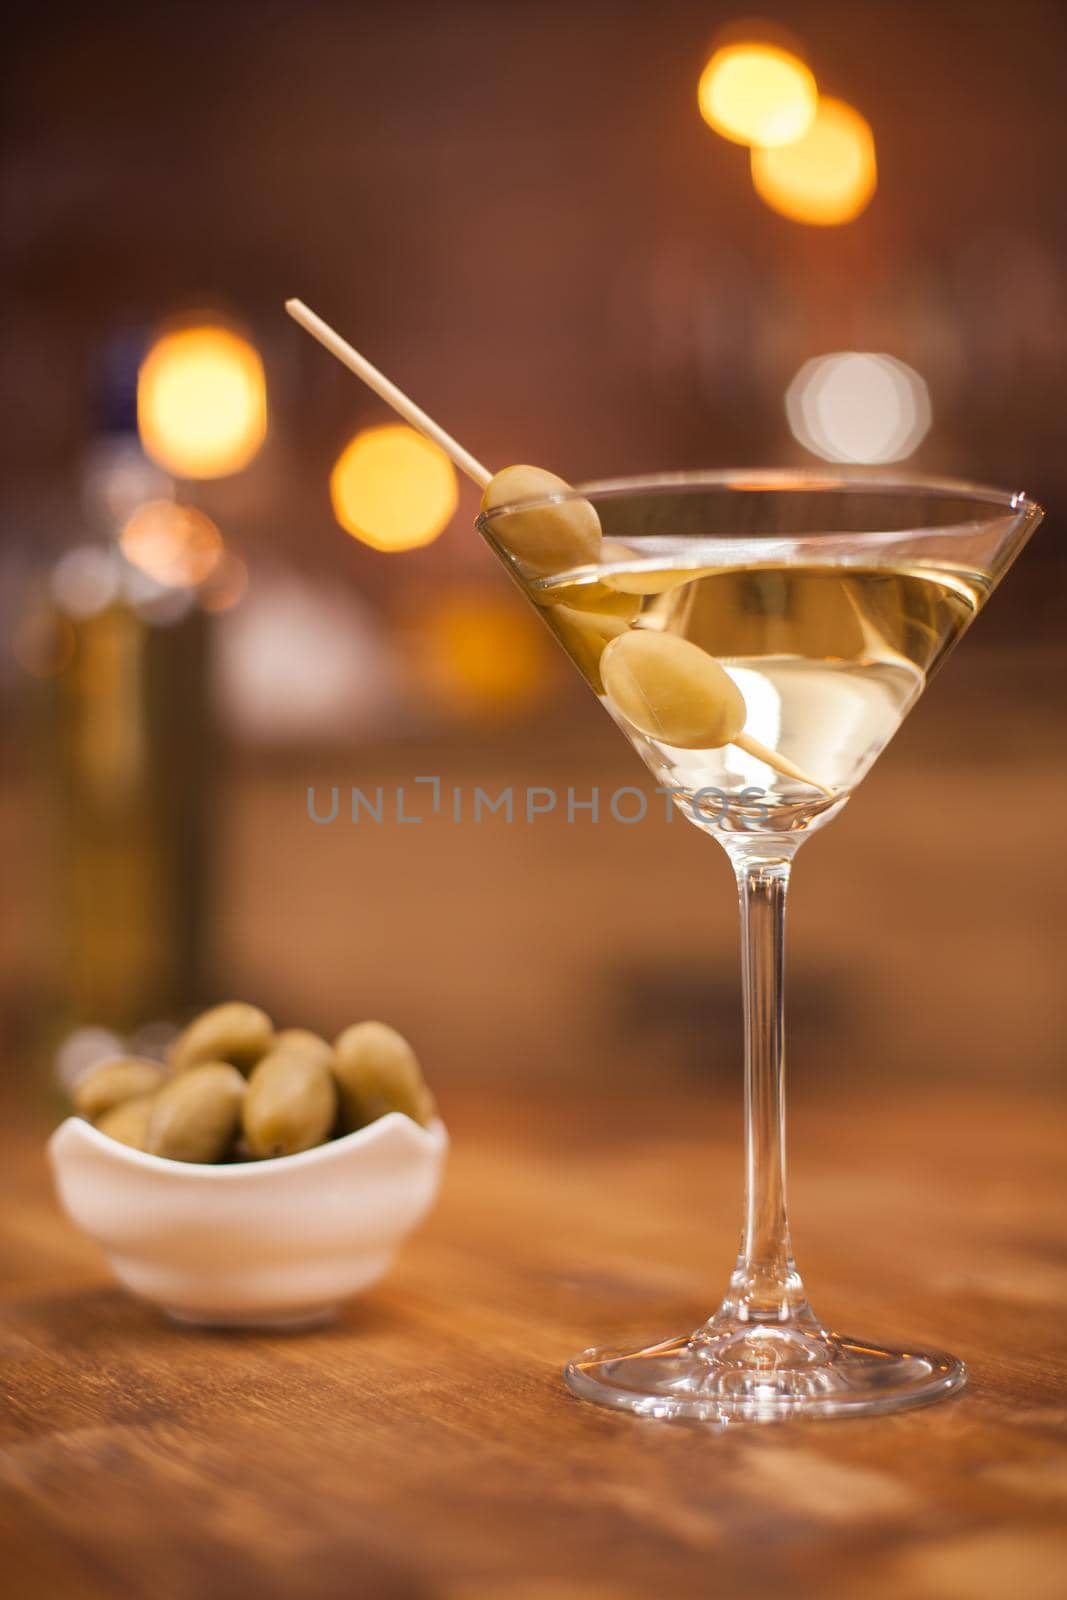 Tasty glass of dry martini with olives on a stick and a bowl of olives next to it. Relaxing with a glass of martini.